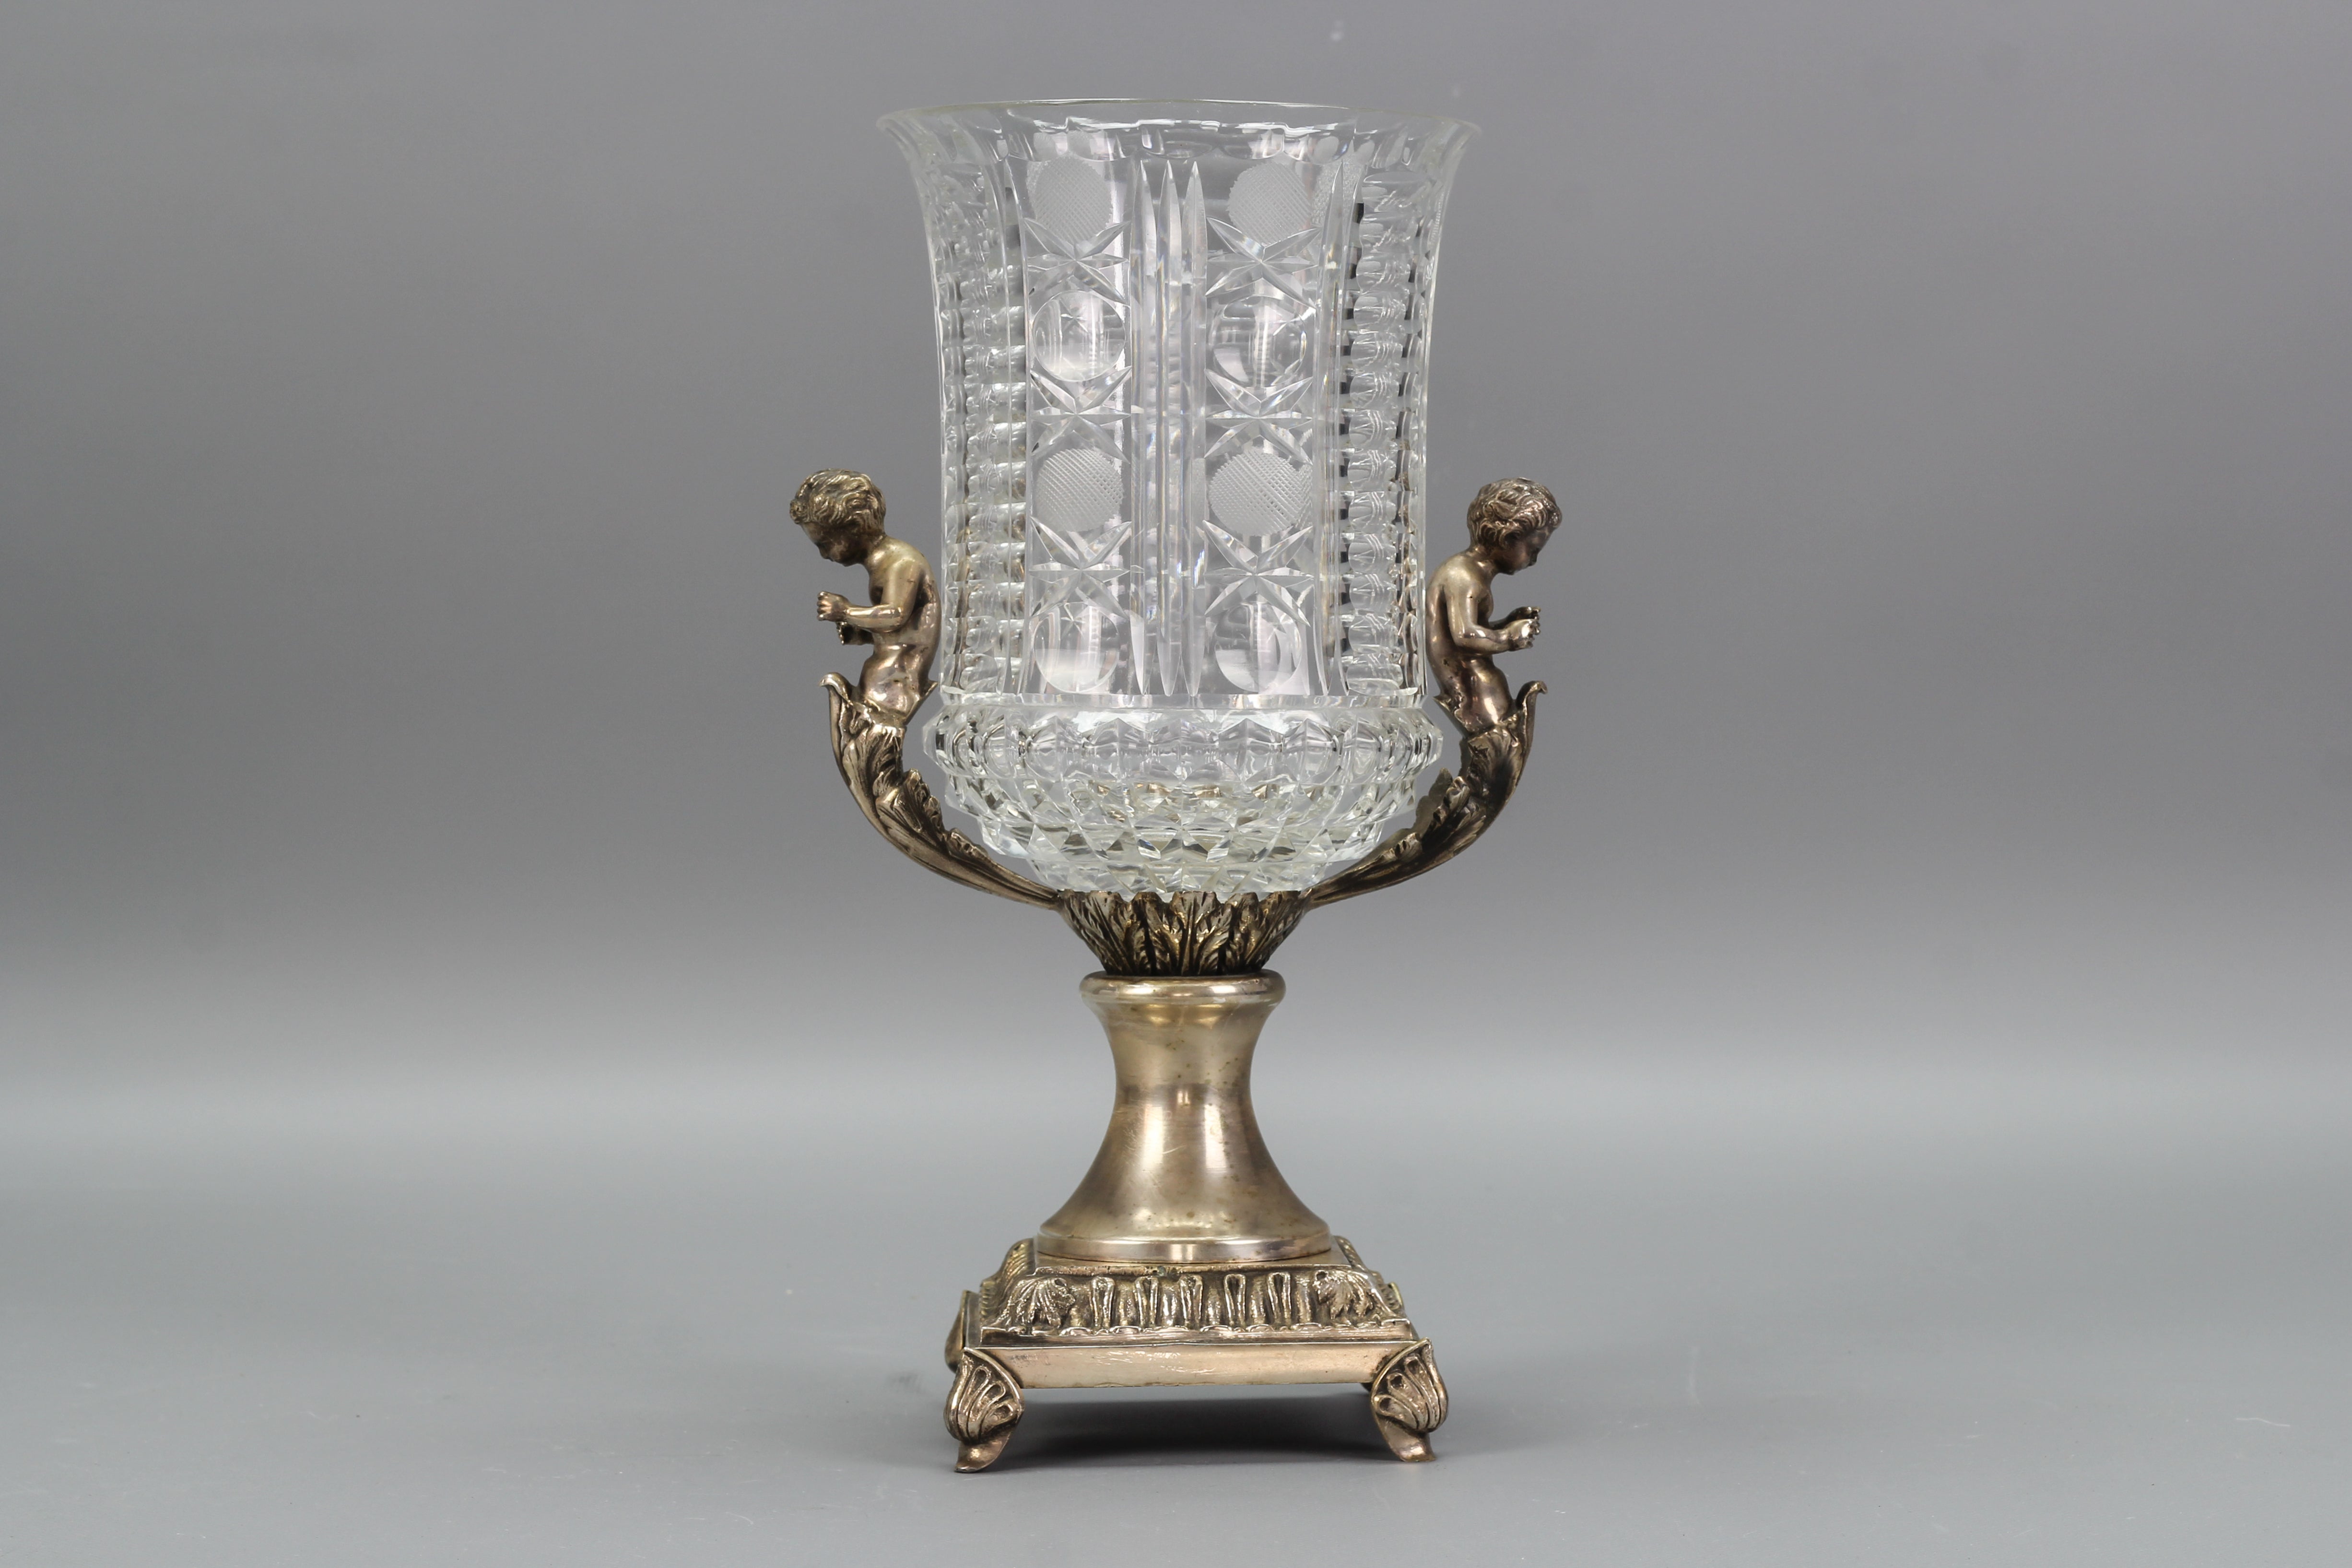 Czech crystal glass and brass vase with cherubs, ca. 1970s.
This beautiful Victorian-style vase features a clear, cut crystal glass vase mounted on brass feet with cherubs adorned with leaf decors.
Dimensions: height: 31 cm / 12.2 in; width: 18 cm /